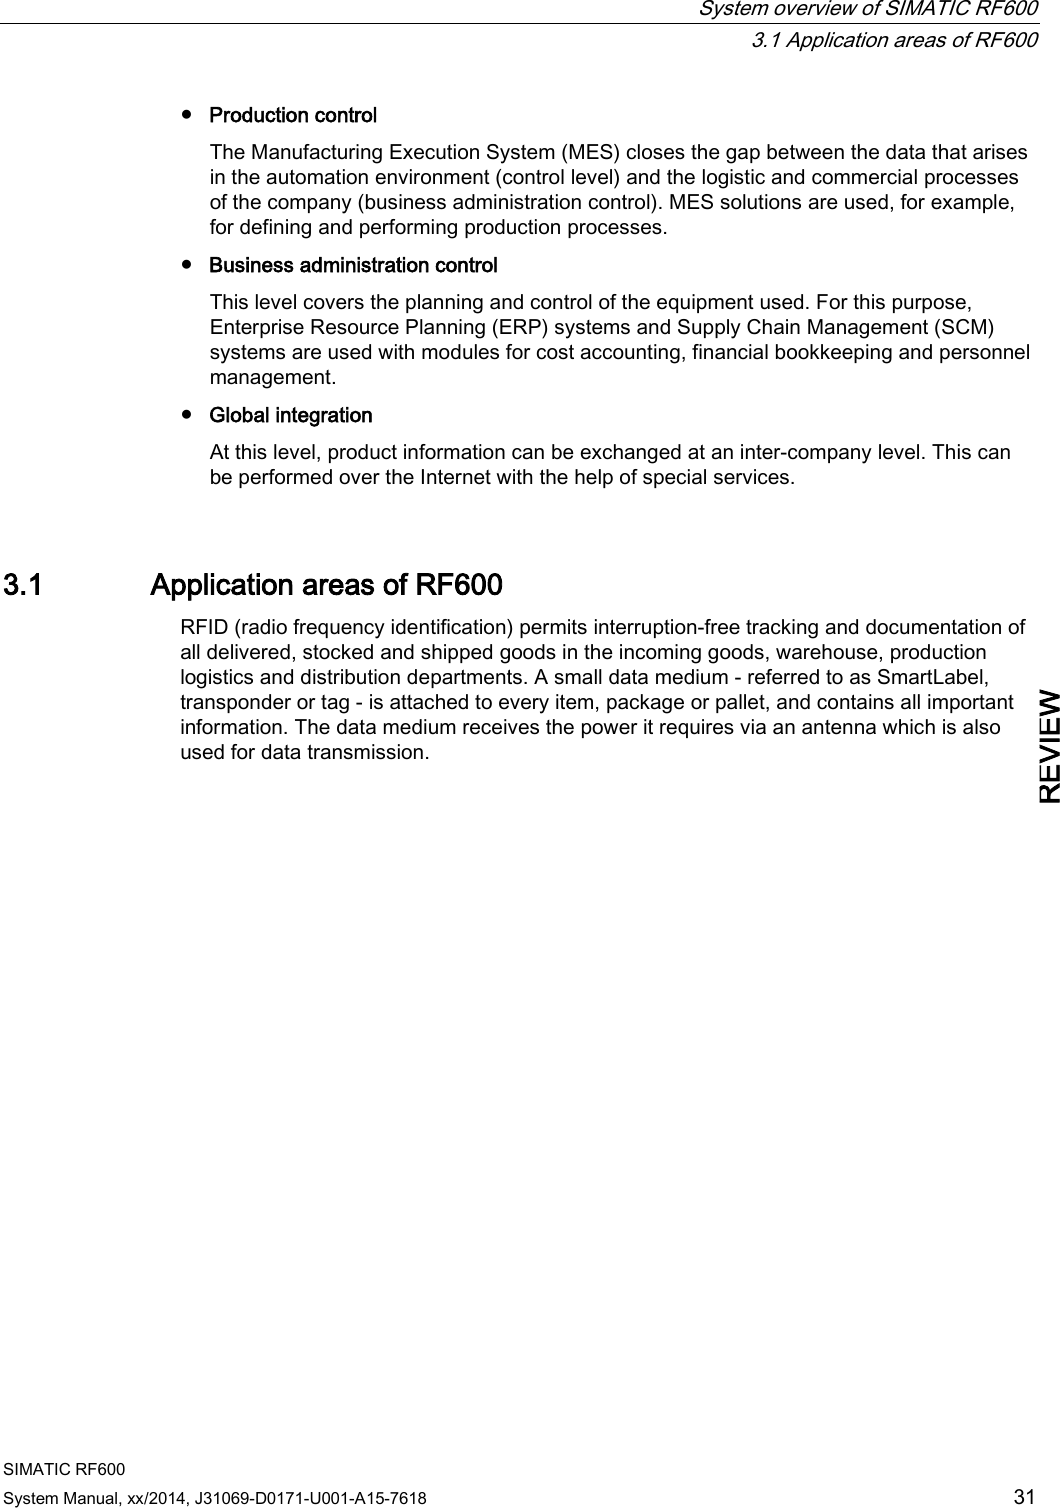  System overview of SIMATIC RF600  3.1 Application areas of RF600 SIMATIC RF600 System Manual, xx/2014, J31069-D0171-U001-A15-7618 31 REVIEW ● Production control The Manufacturing Execution System (MES) closes the gap between the data that arises in the automation environment (control level) and the logistic and commercial processes of the company (business administration control). MES solutions are used, for example, for defining and performing production processes. ● Business administration control This level covers the planning and control of the equipment used. For this purpose, Enterprise Resource Planning (ERP) systems and Supply Chain Management (SCM) systems are used with modules for cost accounting, financial bookkeeping and personnel management. ● Global integration At this level, product information can be exchanged at an inter-company level. This can be performed over the Internet with the help of special services. 3.1 Application areas of RF600 RFID (radio frequency identification) permits interruption-free tracking and documentation of all delivered, stocked and shipped goods in the incoming goods, warehouse, production logistics and distribution departments. A small data medium - referred to as SmartLabel, transponder or tag - is attached to every item, package or pallet, and contains all important information. The data medium receives the power it requires via an antenna which is also used for data transmission.         